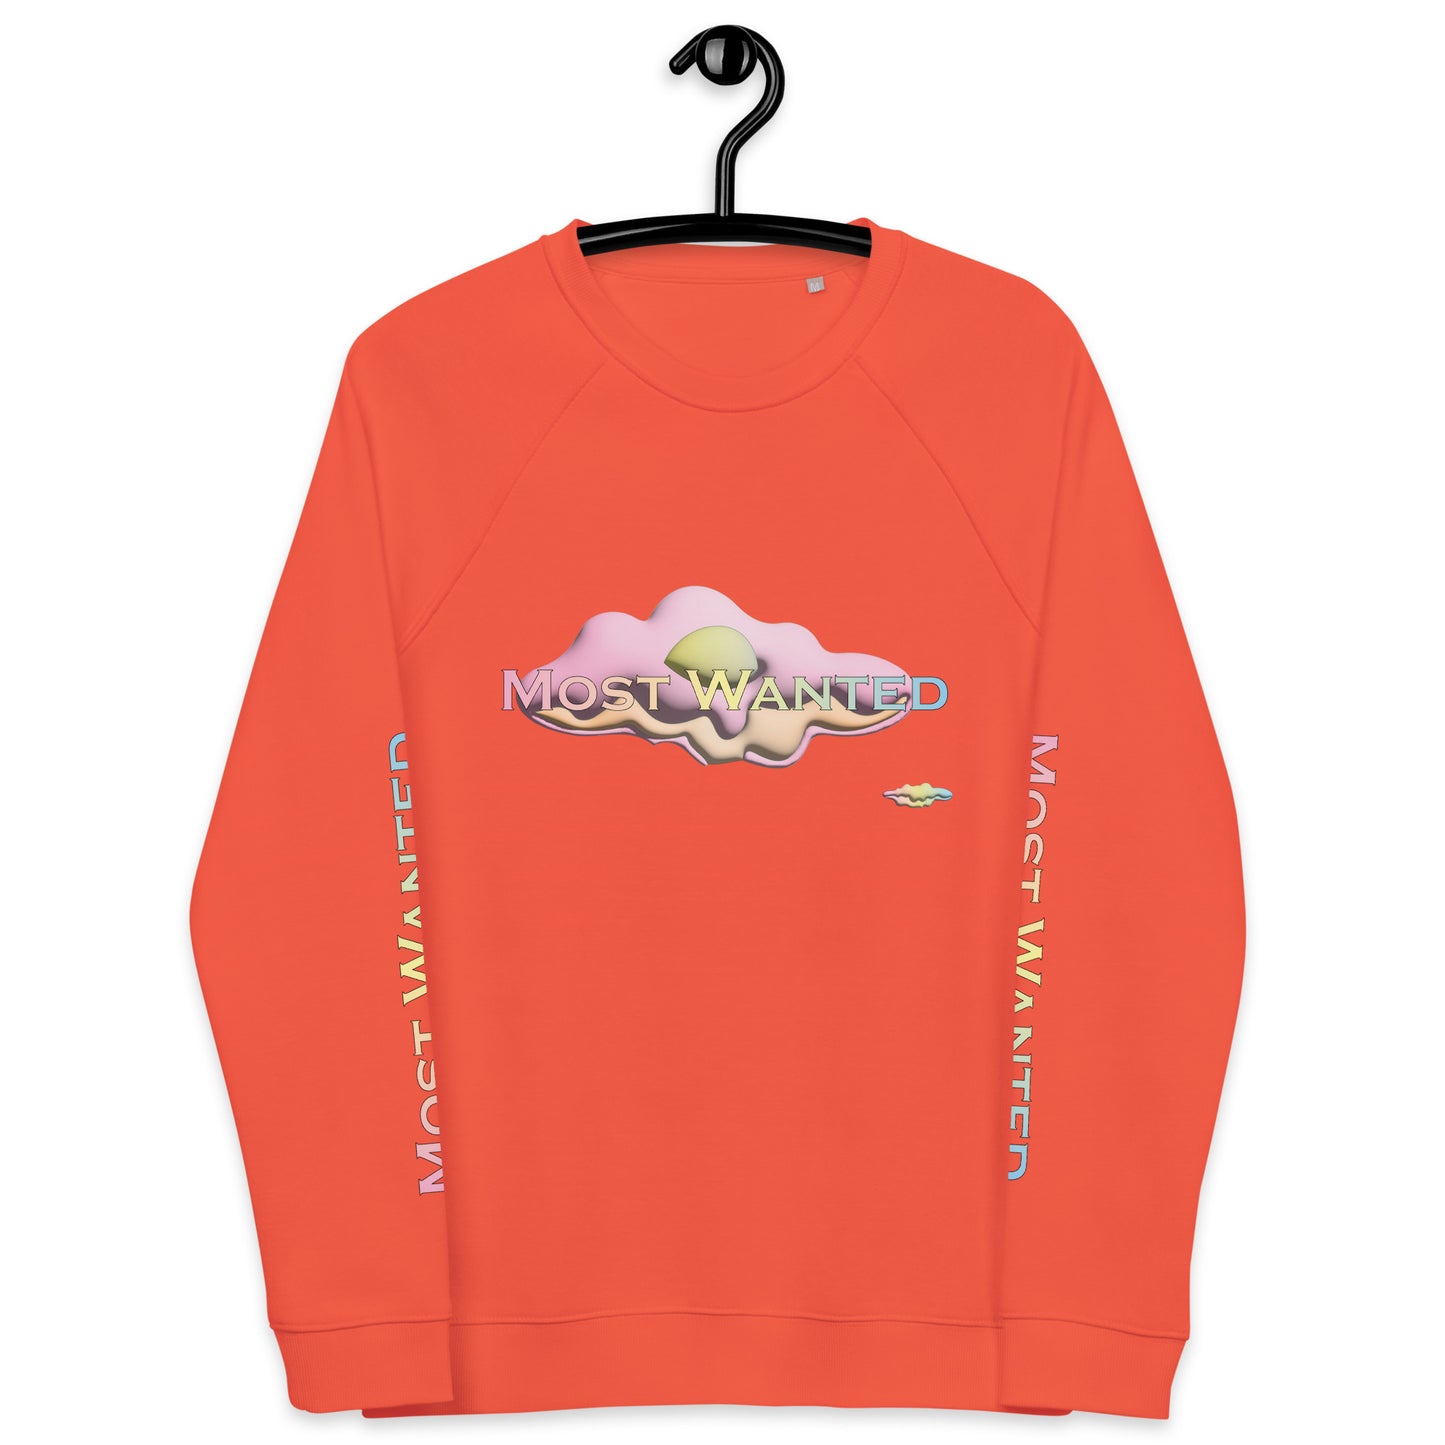 MOST WANTED CLOUDS 🌨️🌨️SWEATER #1 ⭐⭐⭐